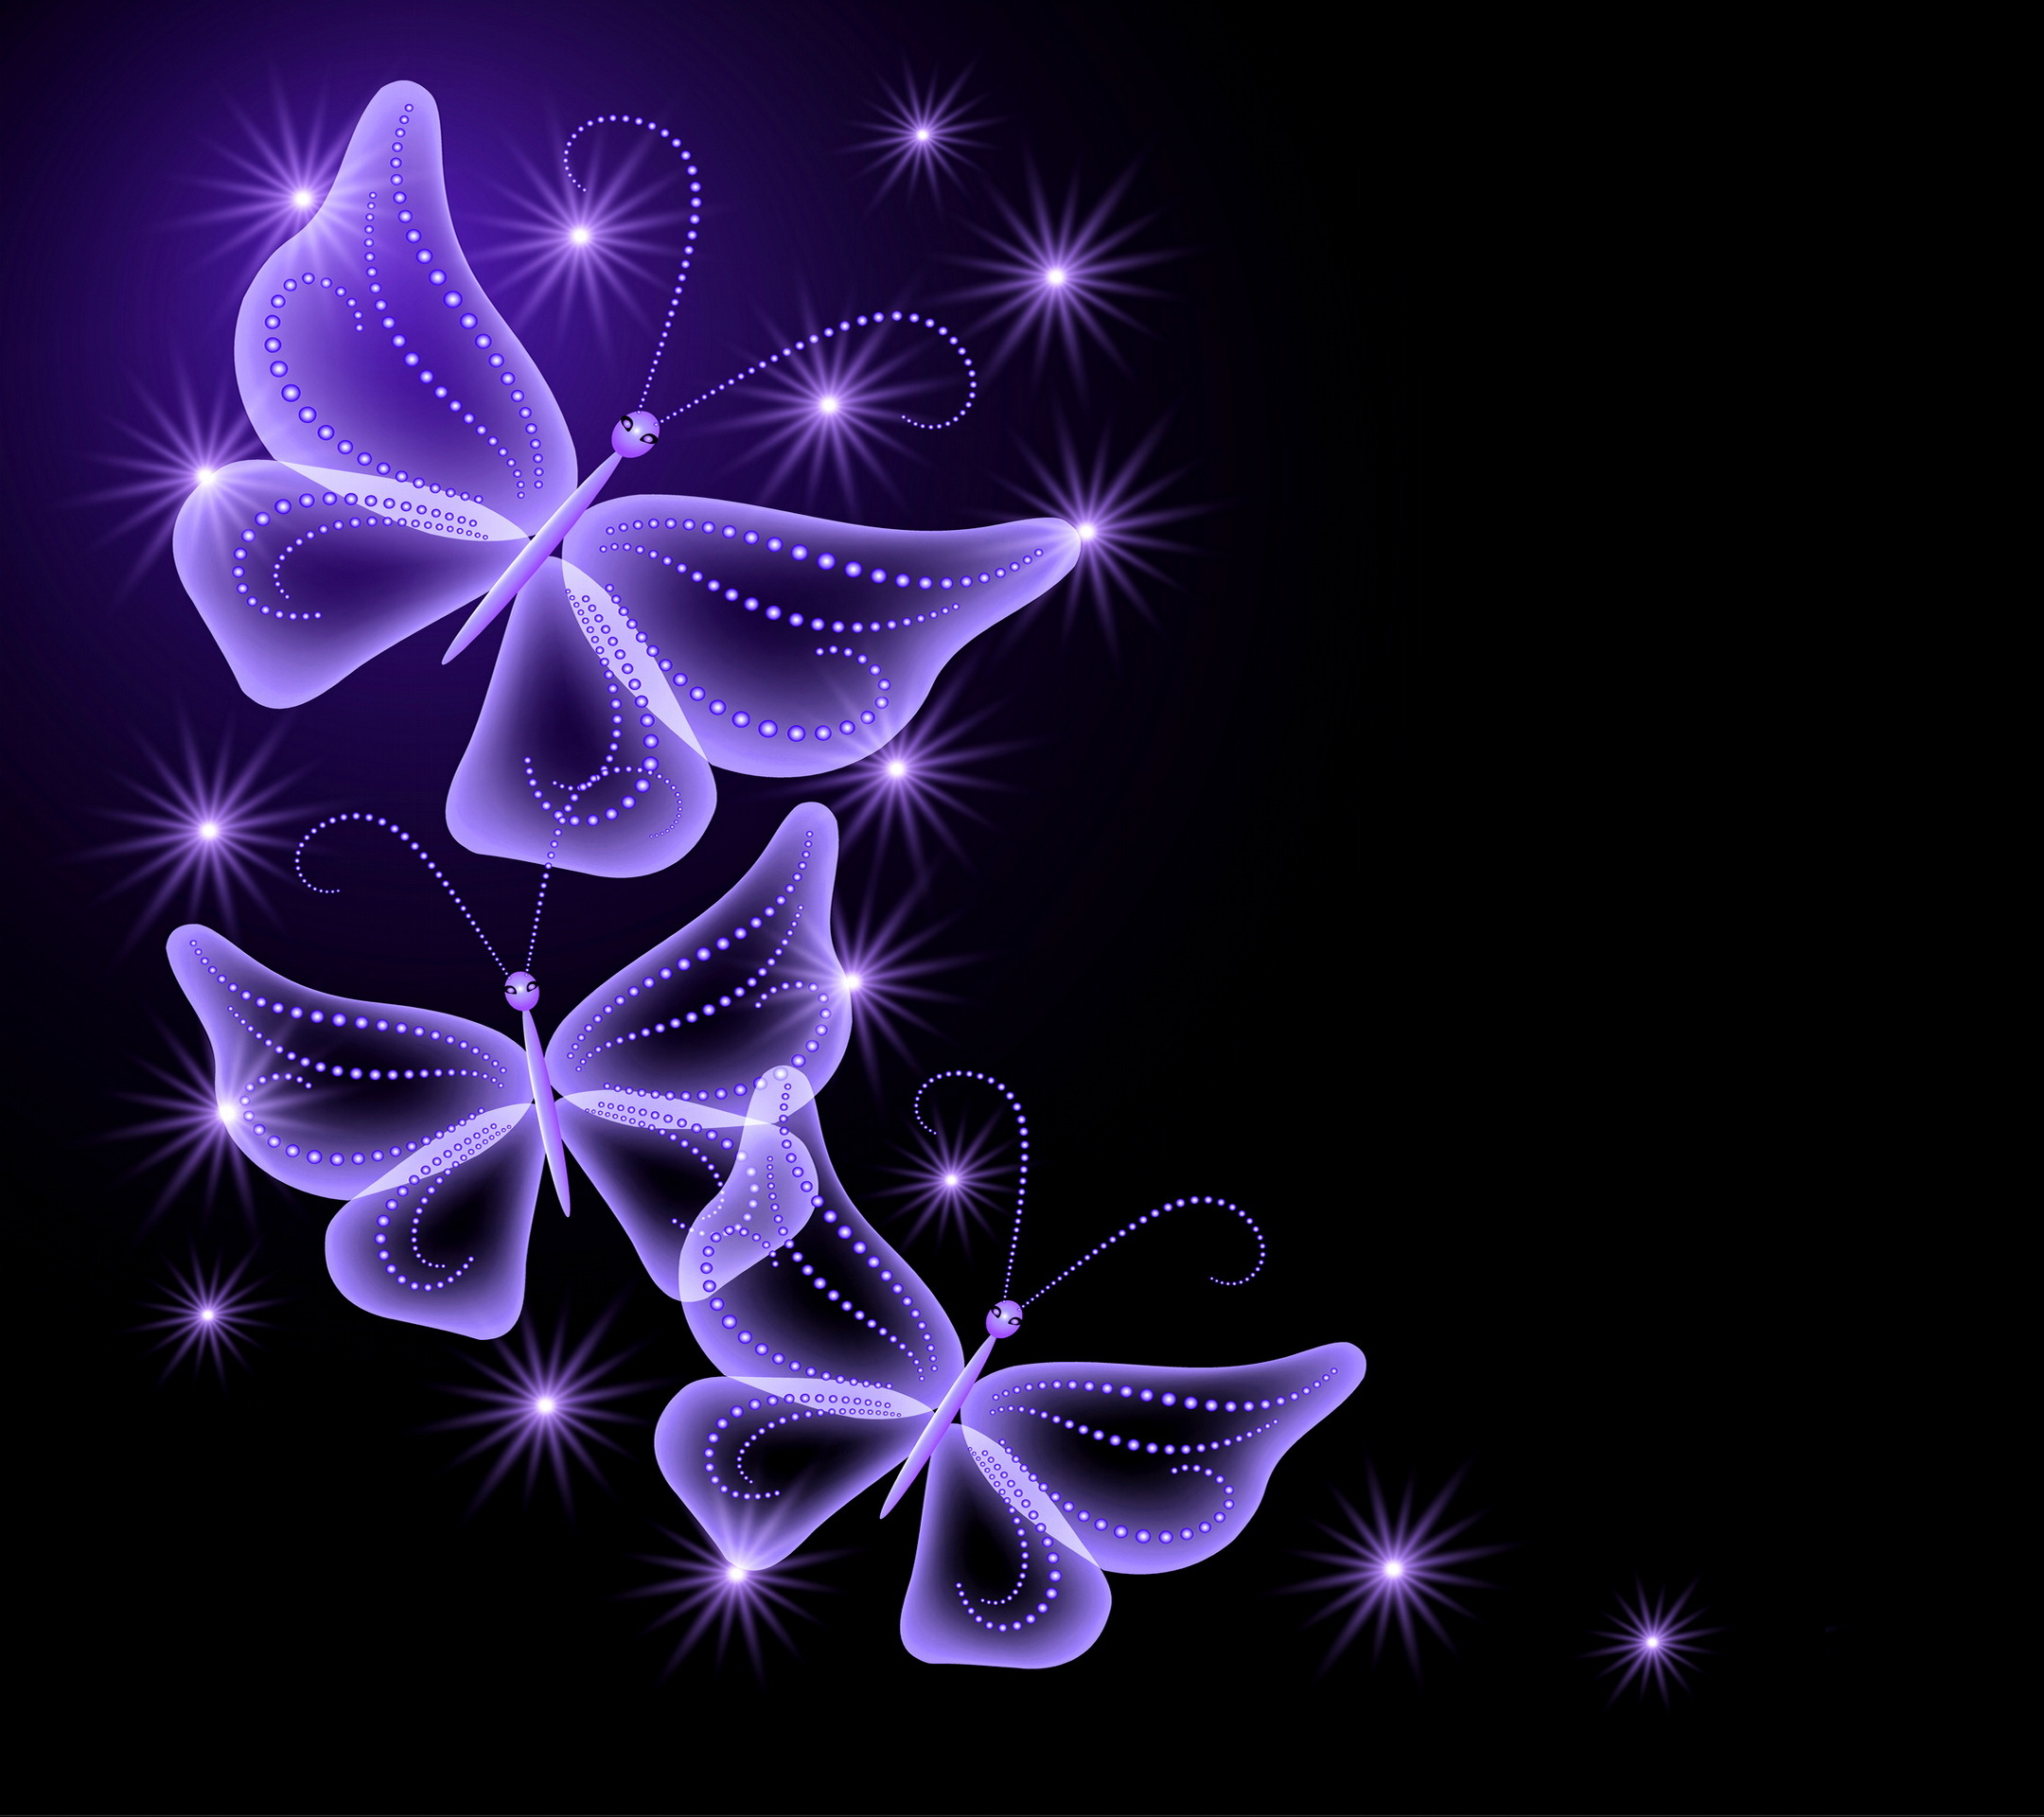 butterfly wallpaper purple and black 1080P 2k 4k HD wallpapers  backgrounds free download  Rare Gallery